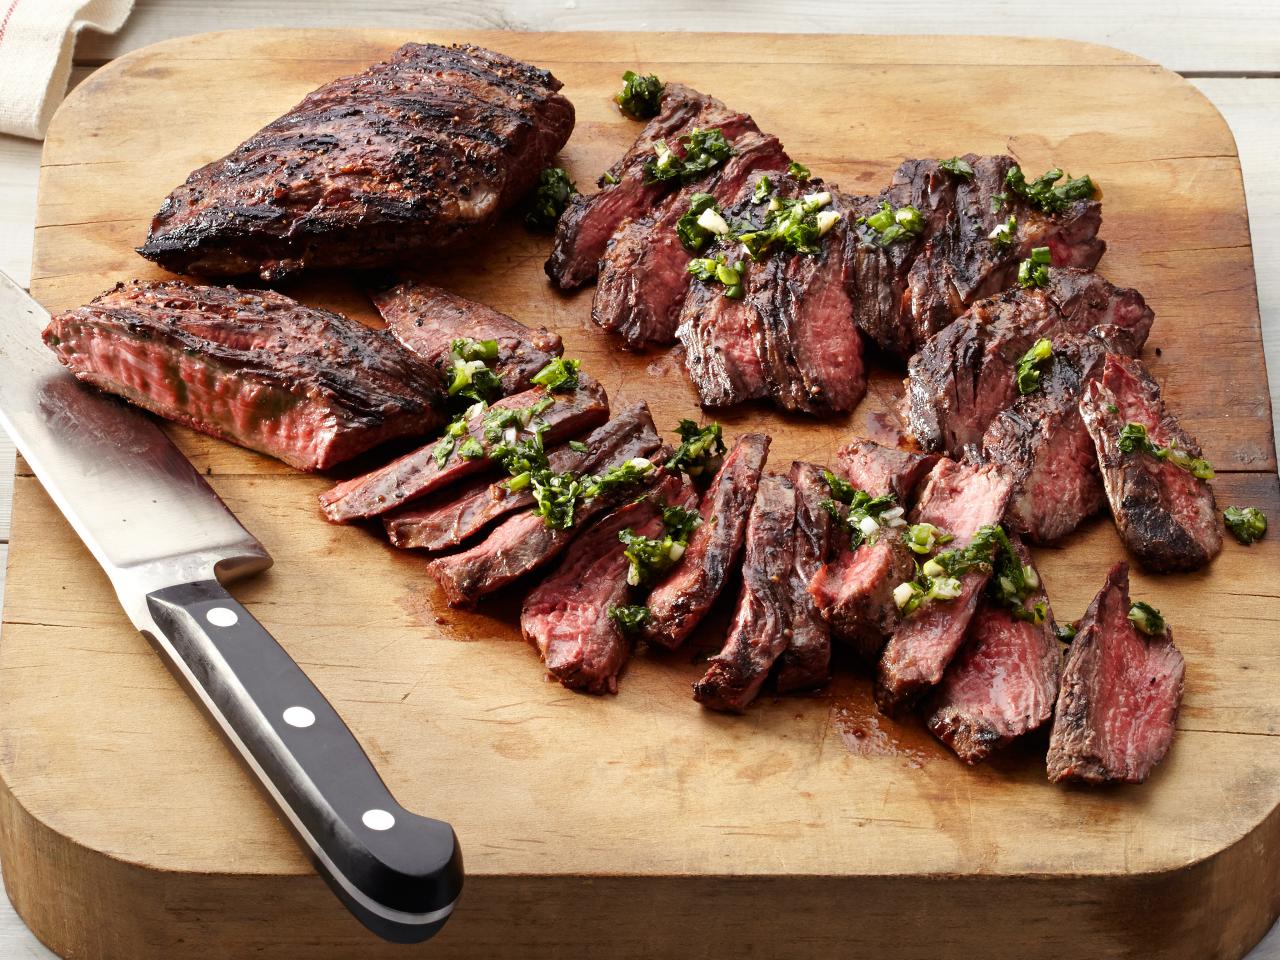 50 grilled steak recipes and ideas : food network | main dish